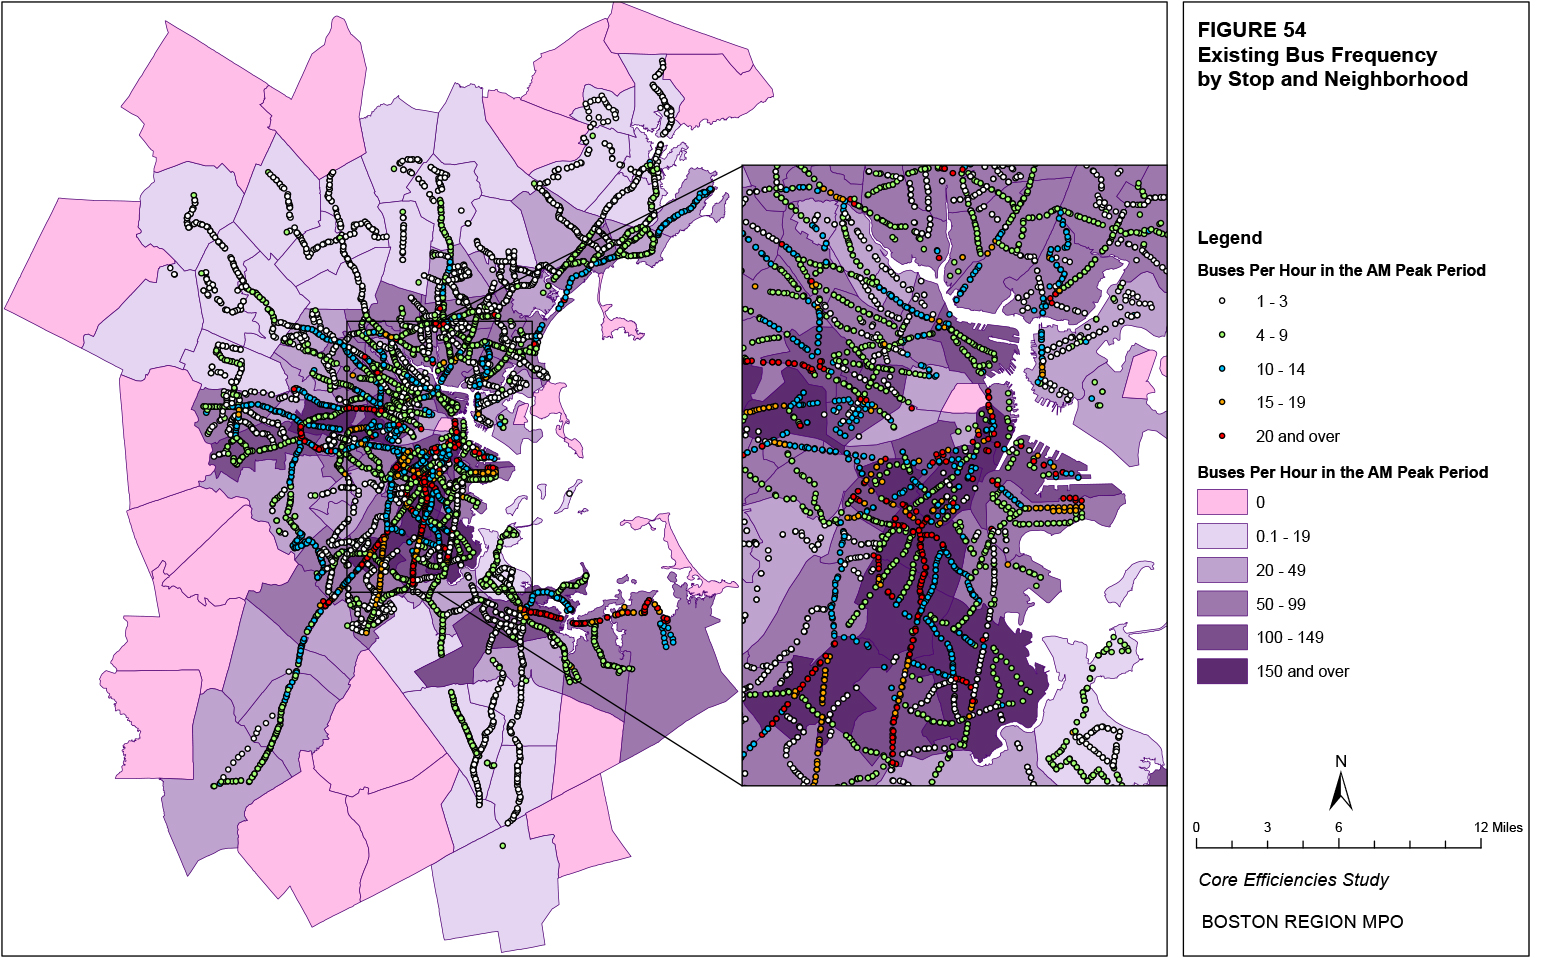 This map shows the existing AM peak bus frequency (vehicles per hour) by stop and neighborhood.